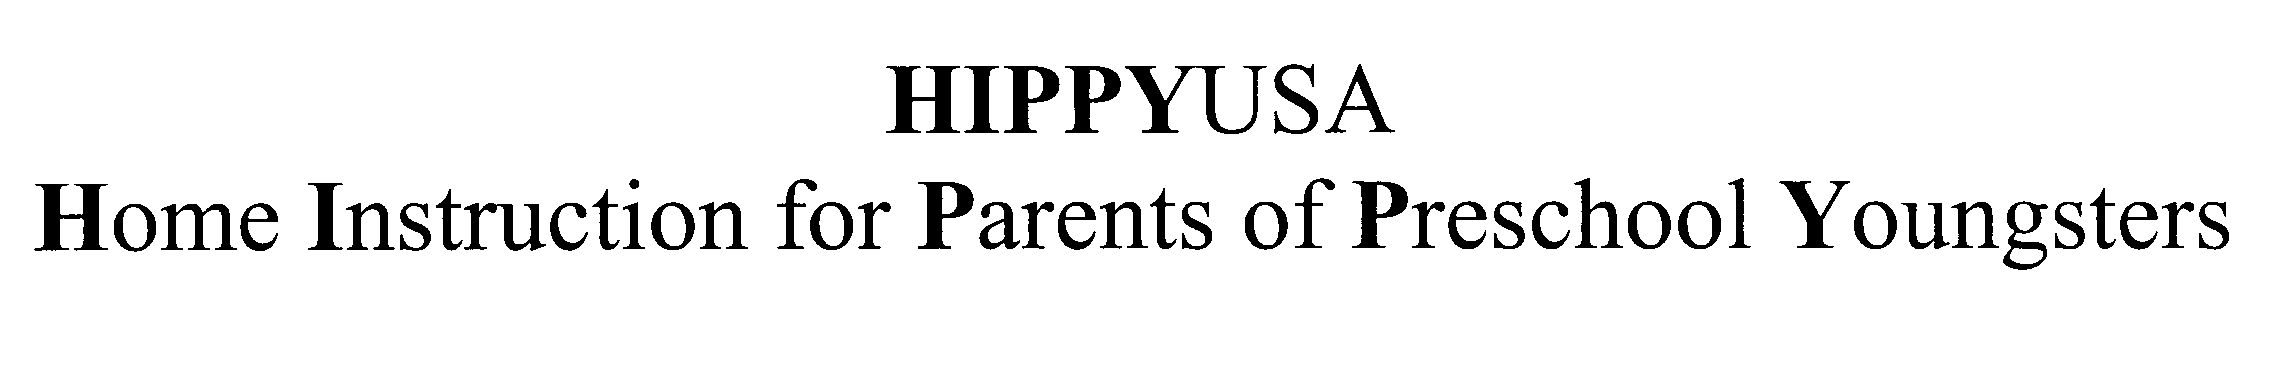  HIPPYUSA HOME INSTRUCTION FOR PARENTS OF PRESCHOOL YOUNGSTERS